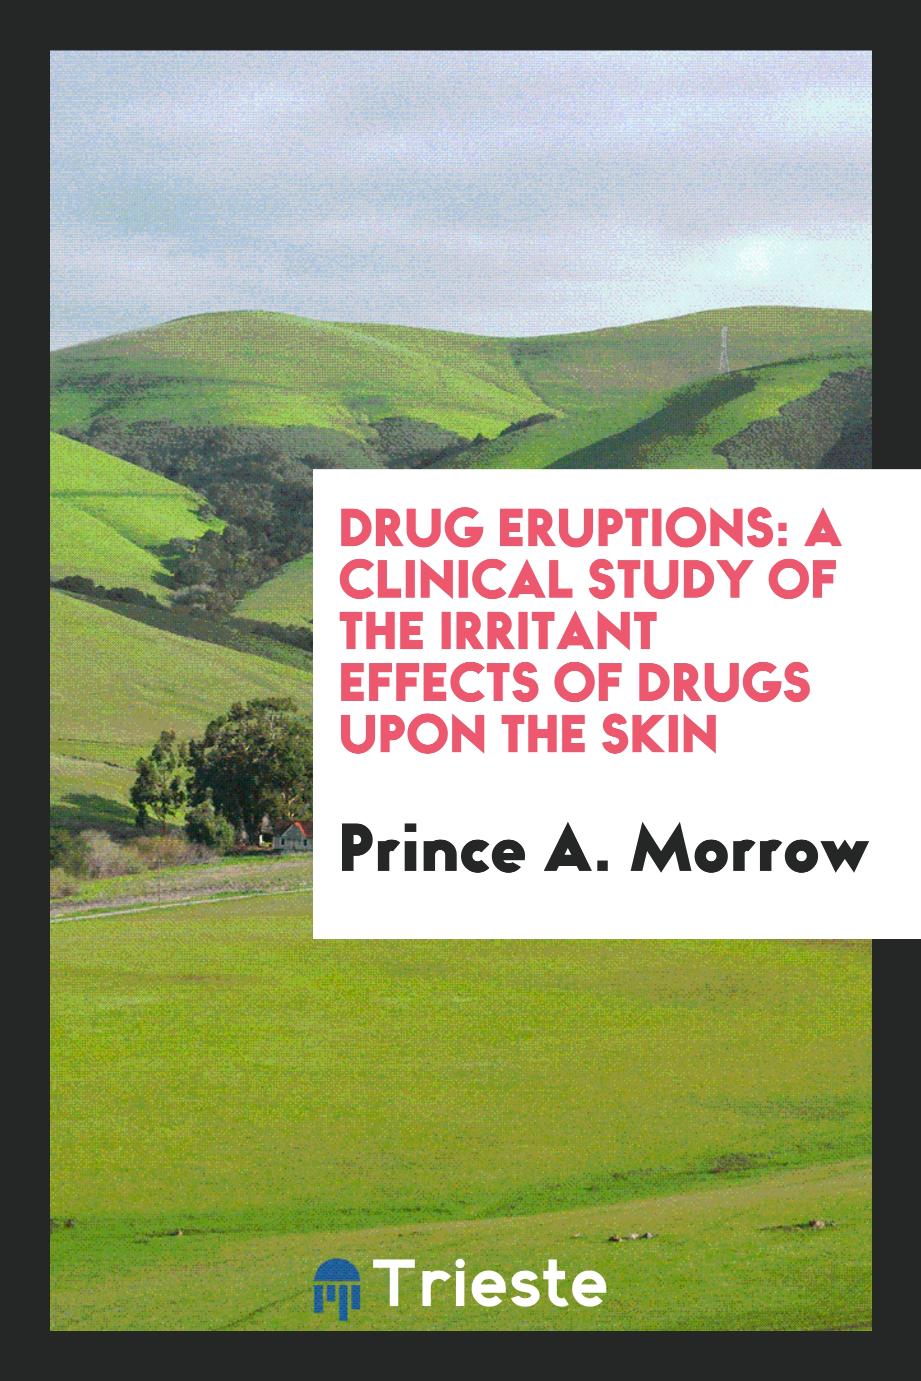 Drug Eruptions: A Clinical Study of the Irritant Effects of Drugs Upon the Skin